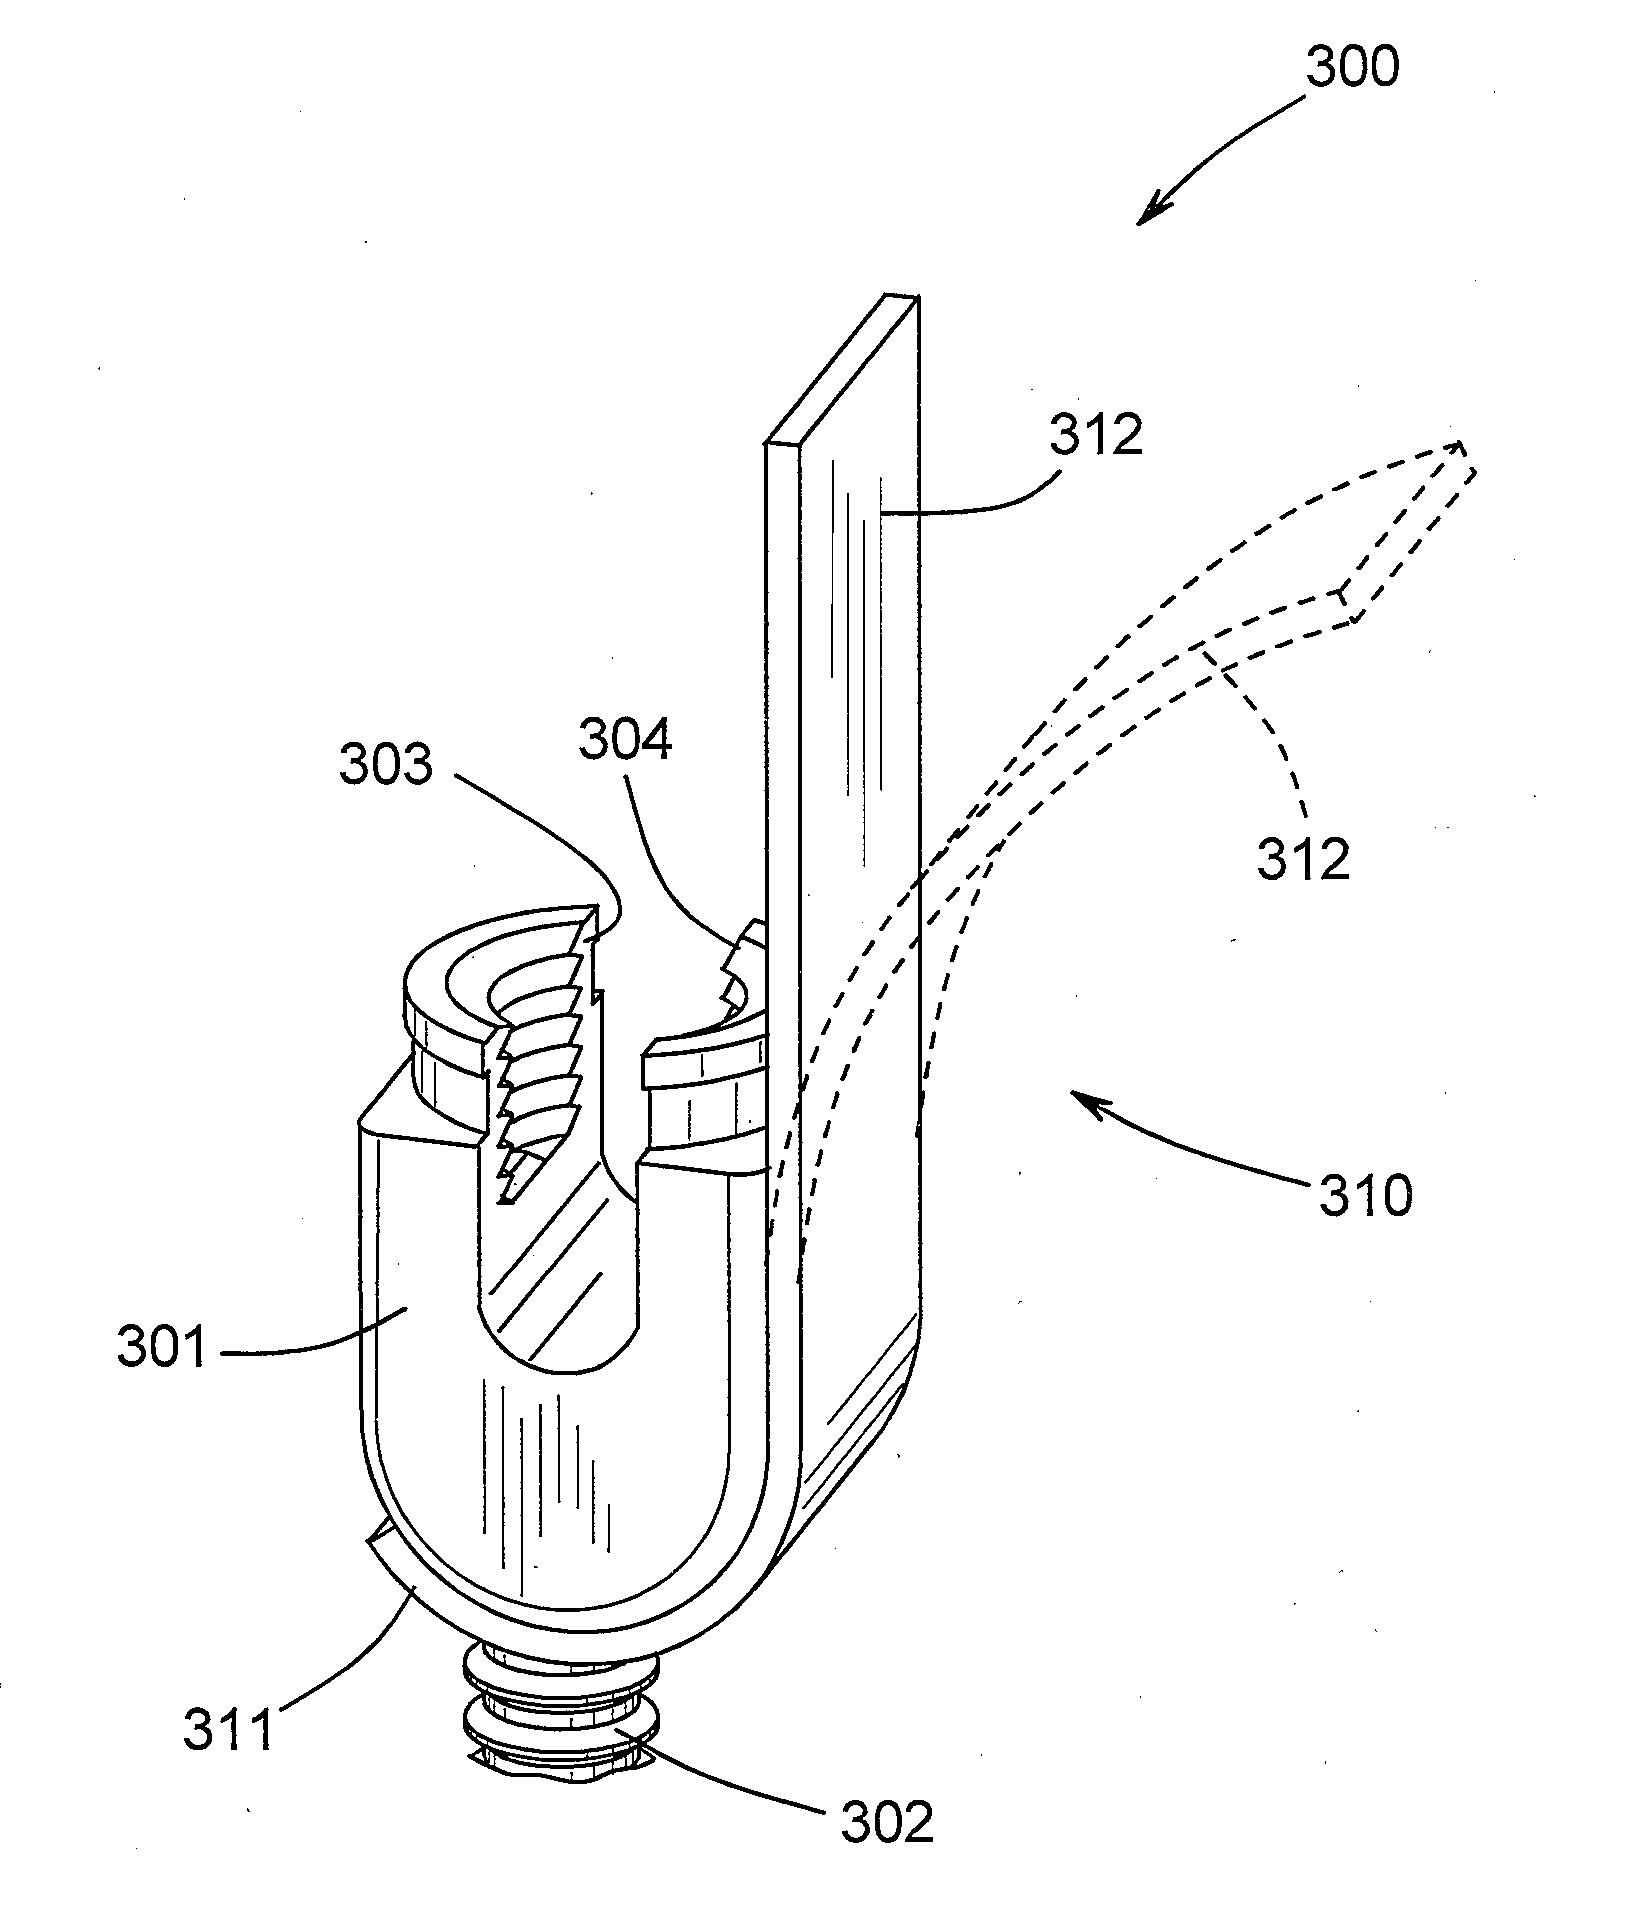 Pedicle screw including stationary and movable members for facilitating the surgical correction of spinal deformities